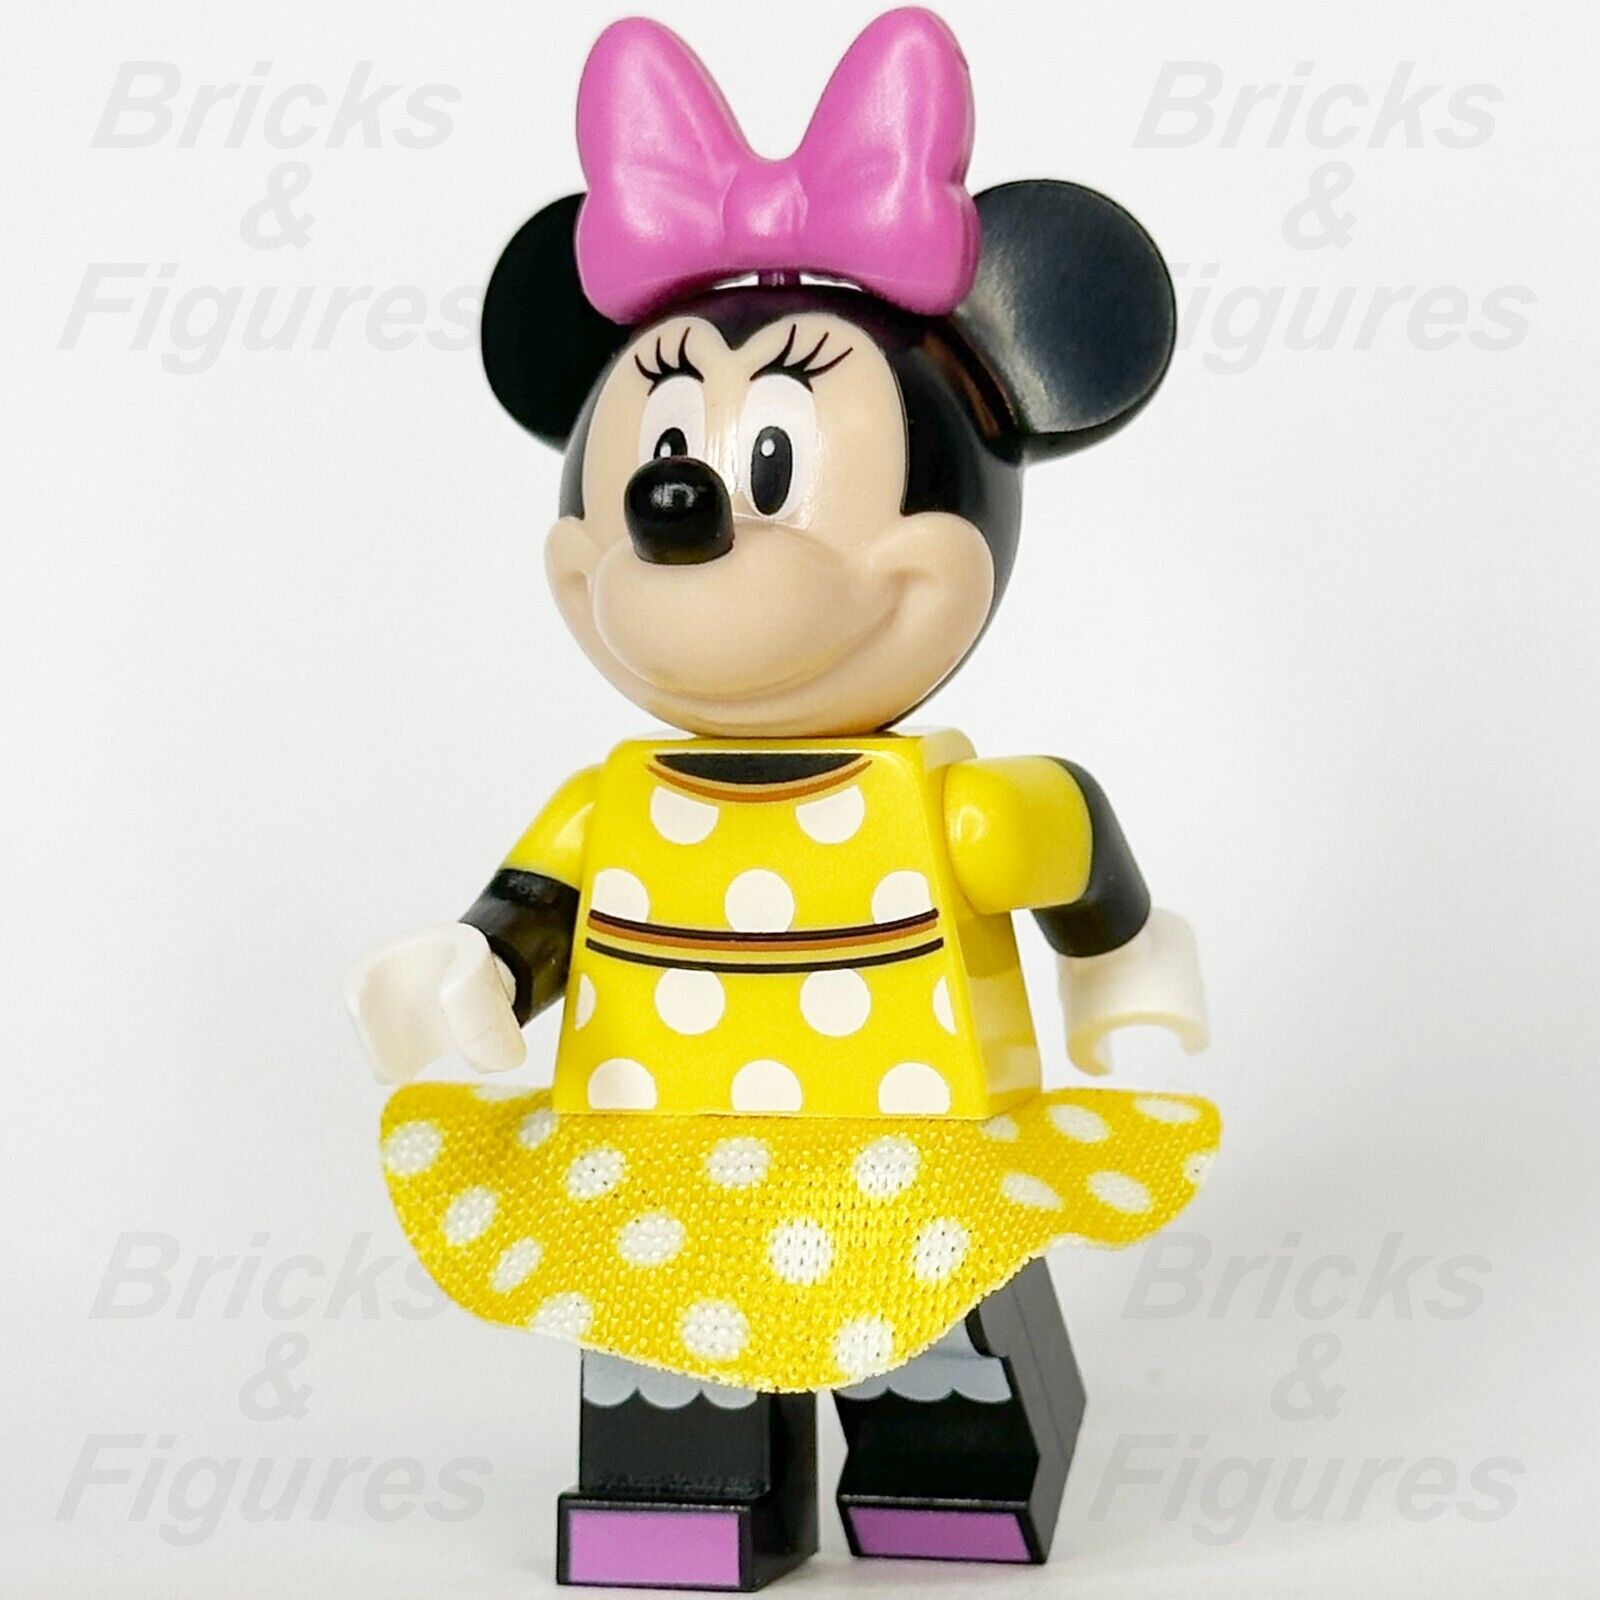 LEGO Disney Minnie Mouse Minifigure Mickey and Friends Yellow Dress 10773 dis056